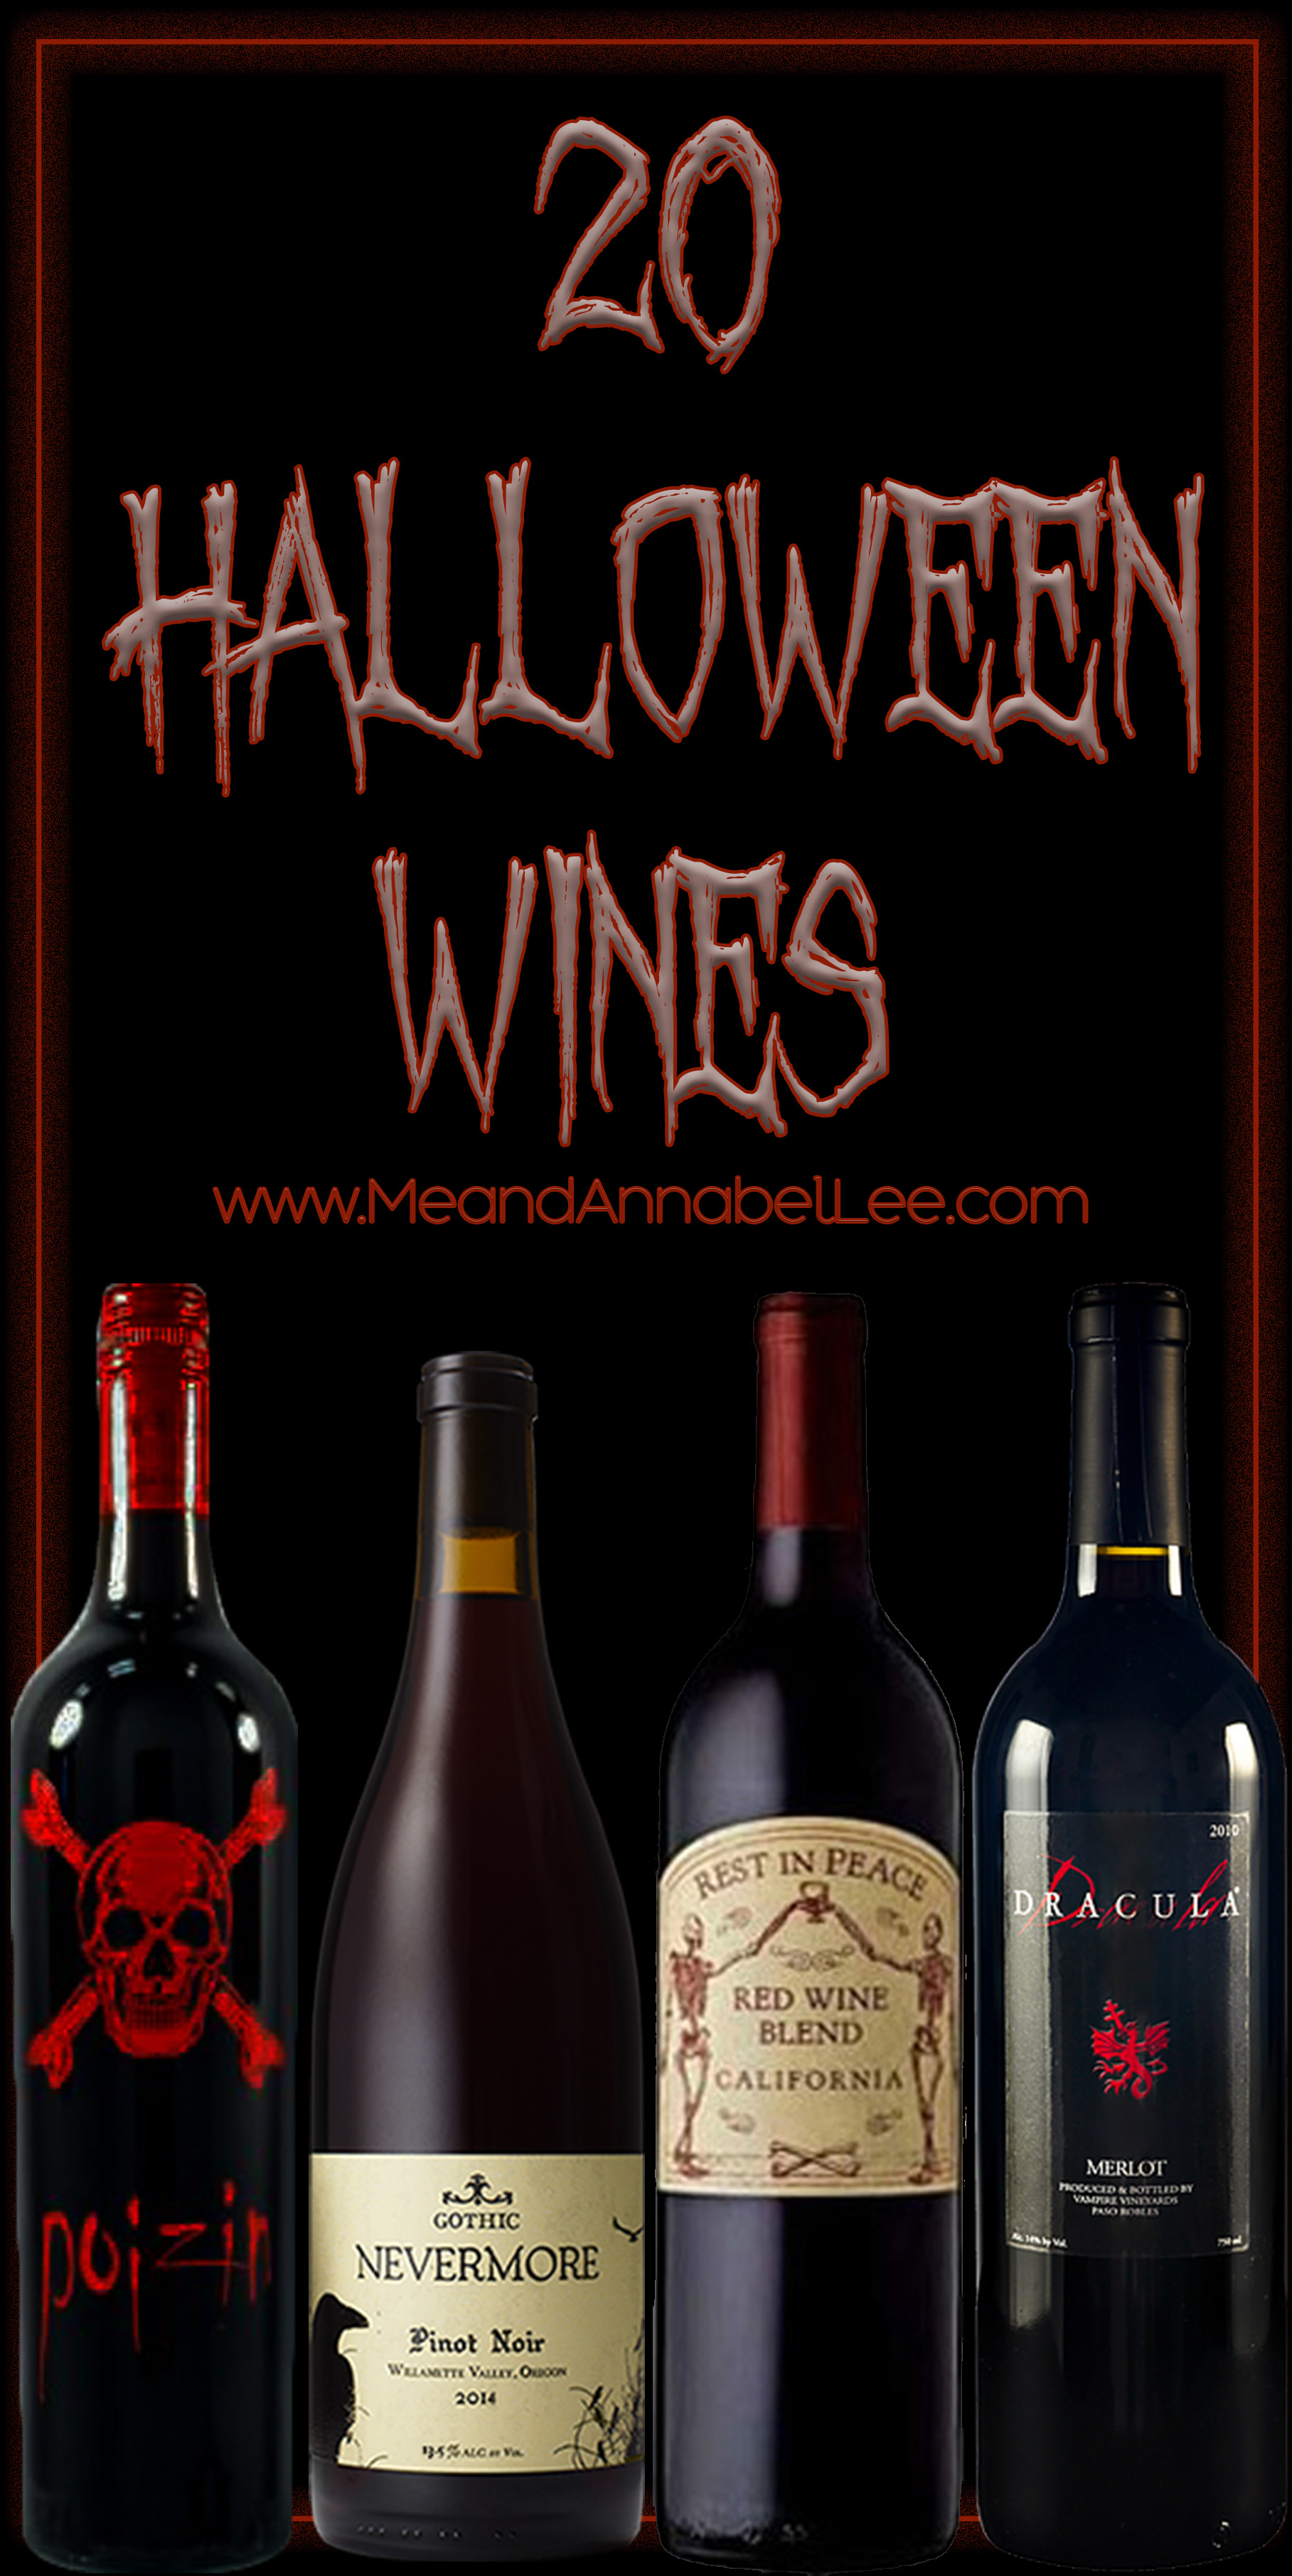 20 Gothic & Halloween Theme Wines | Spooky, Macabre, Chilling Wine Labels | www.MeandAnnabelLee.com